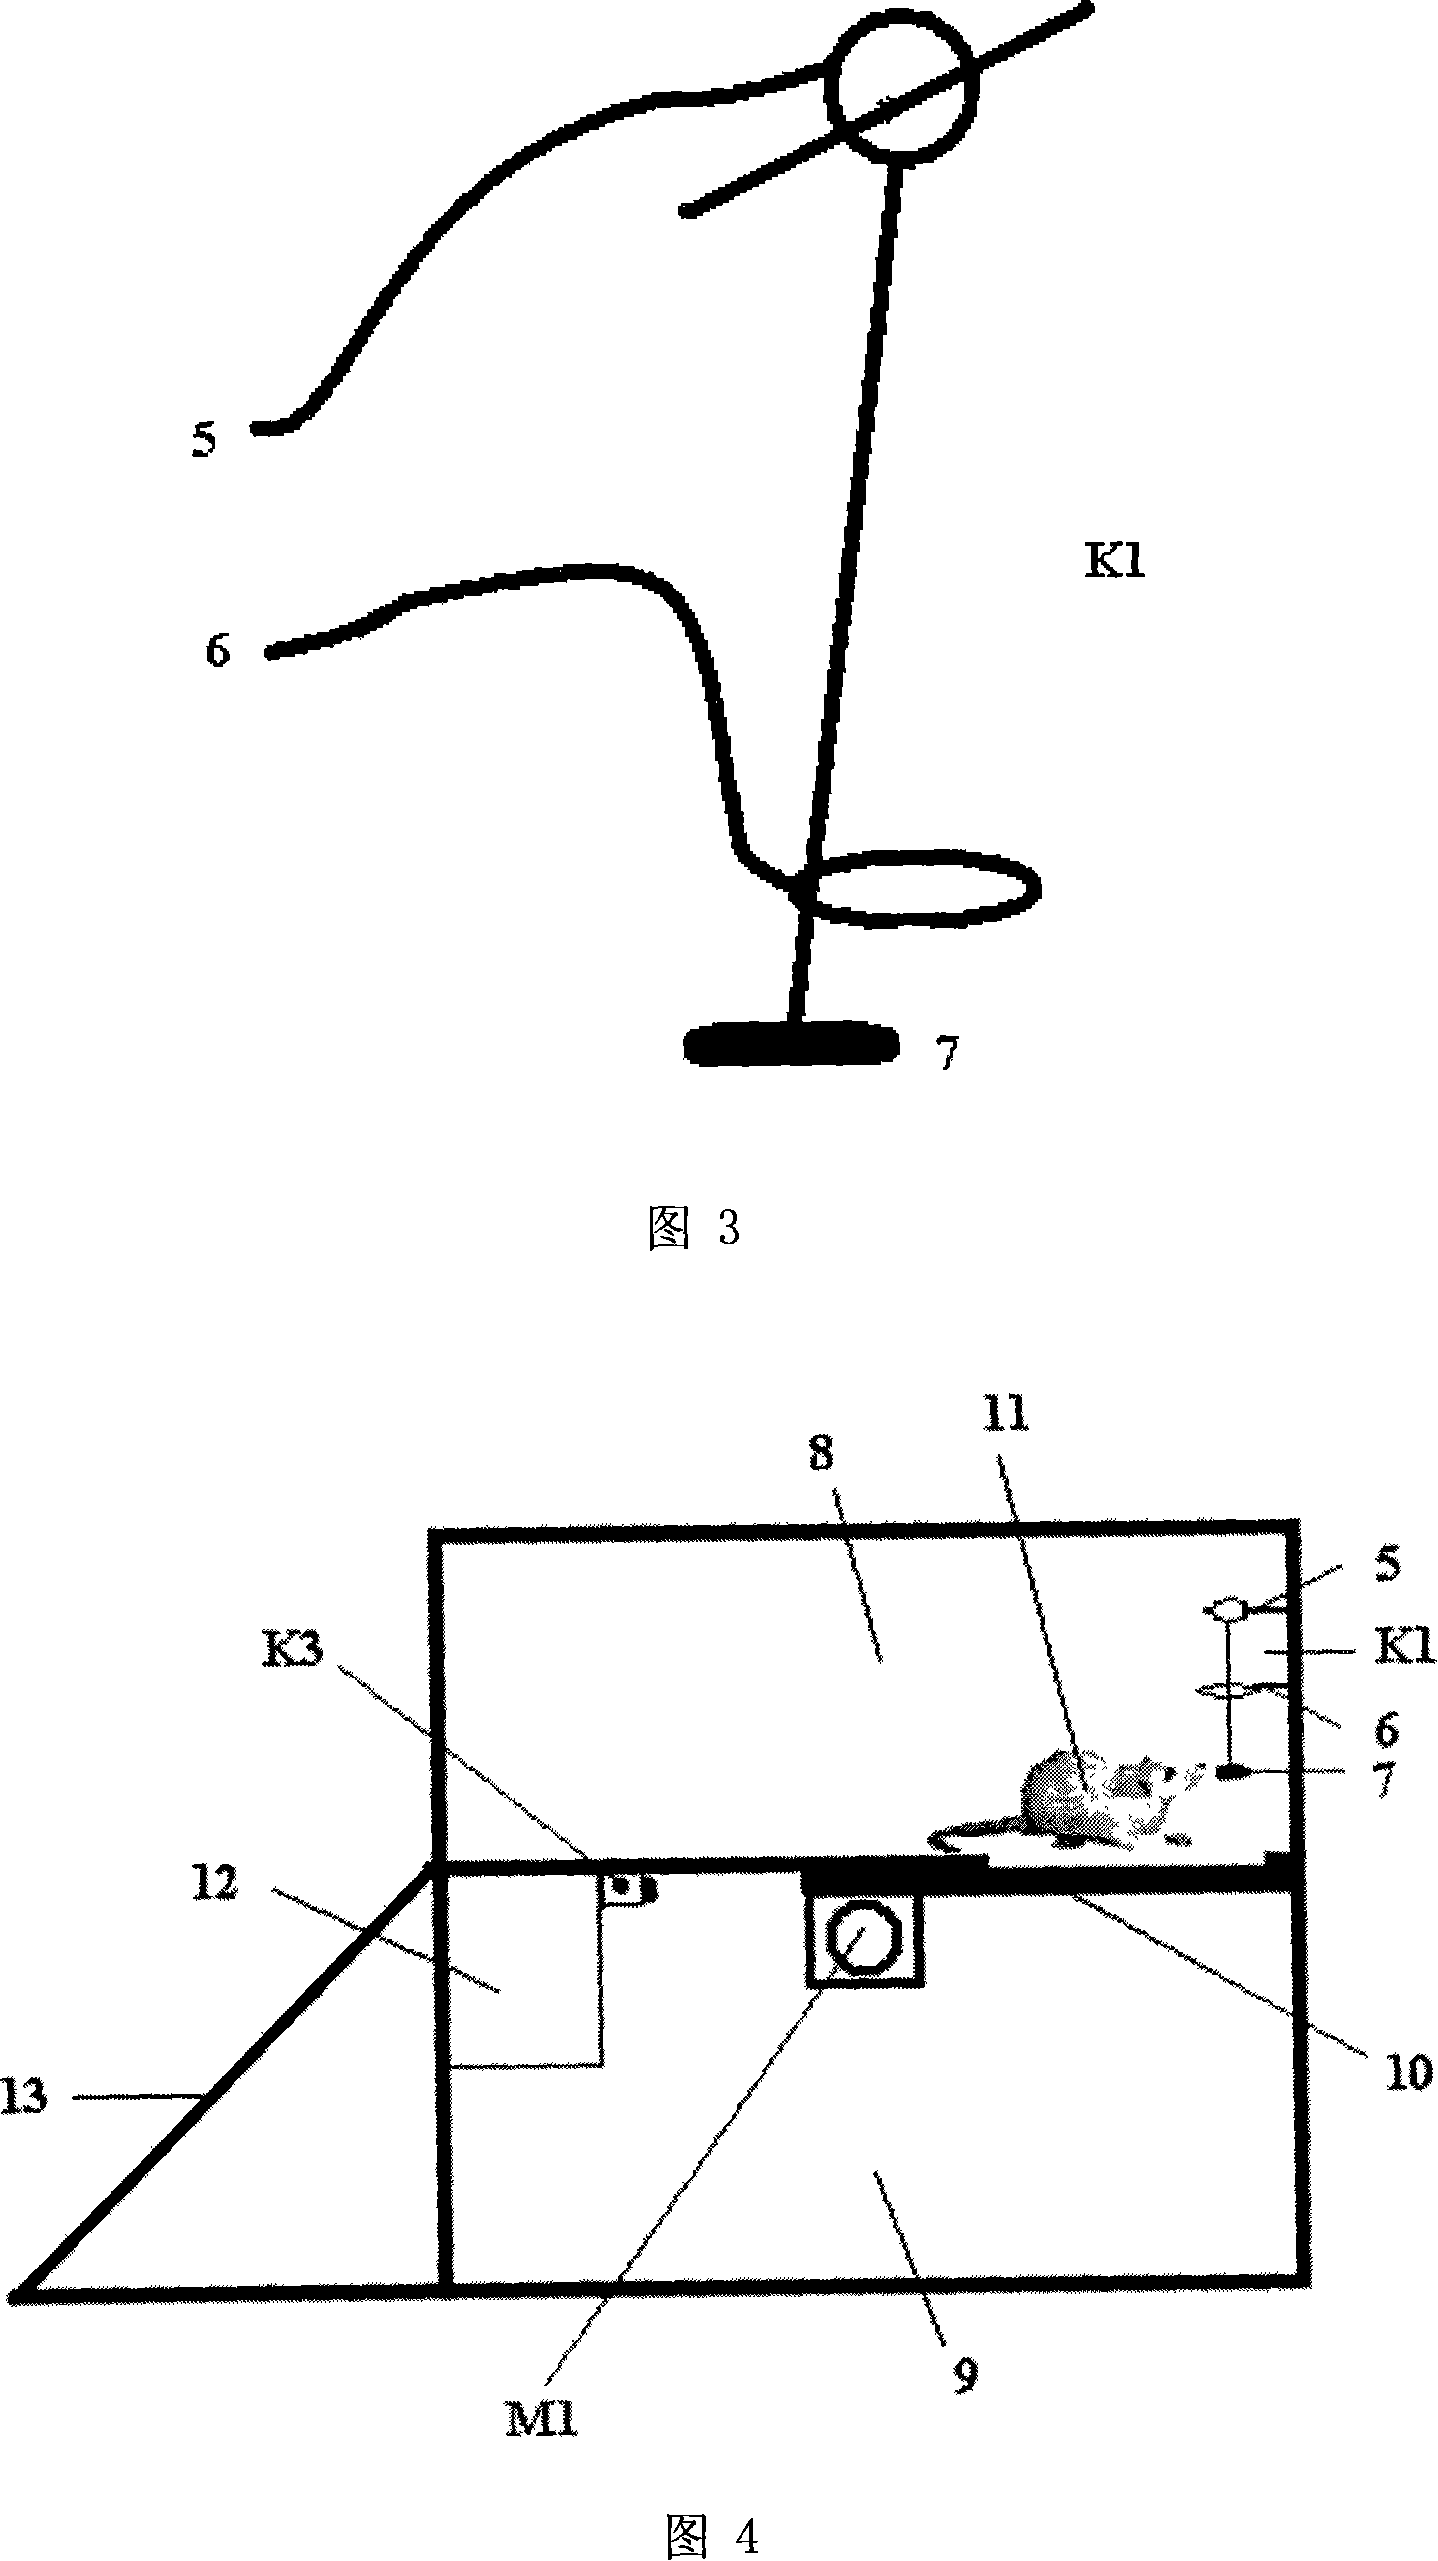 Controllable silicon trigger circuit of continuous mouse trapping boxes